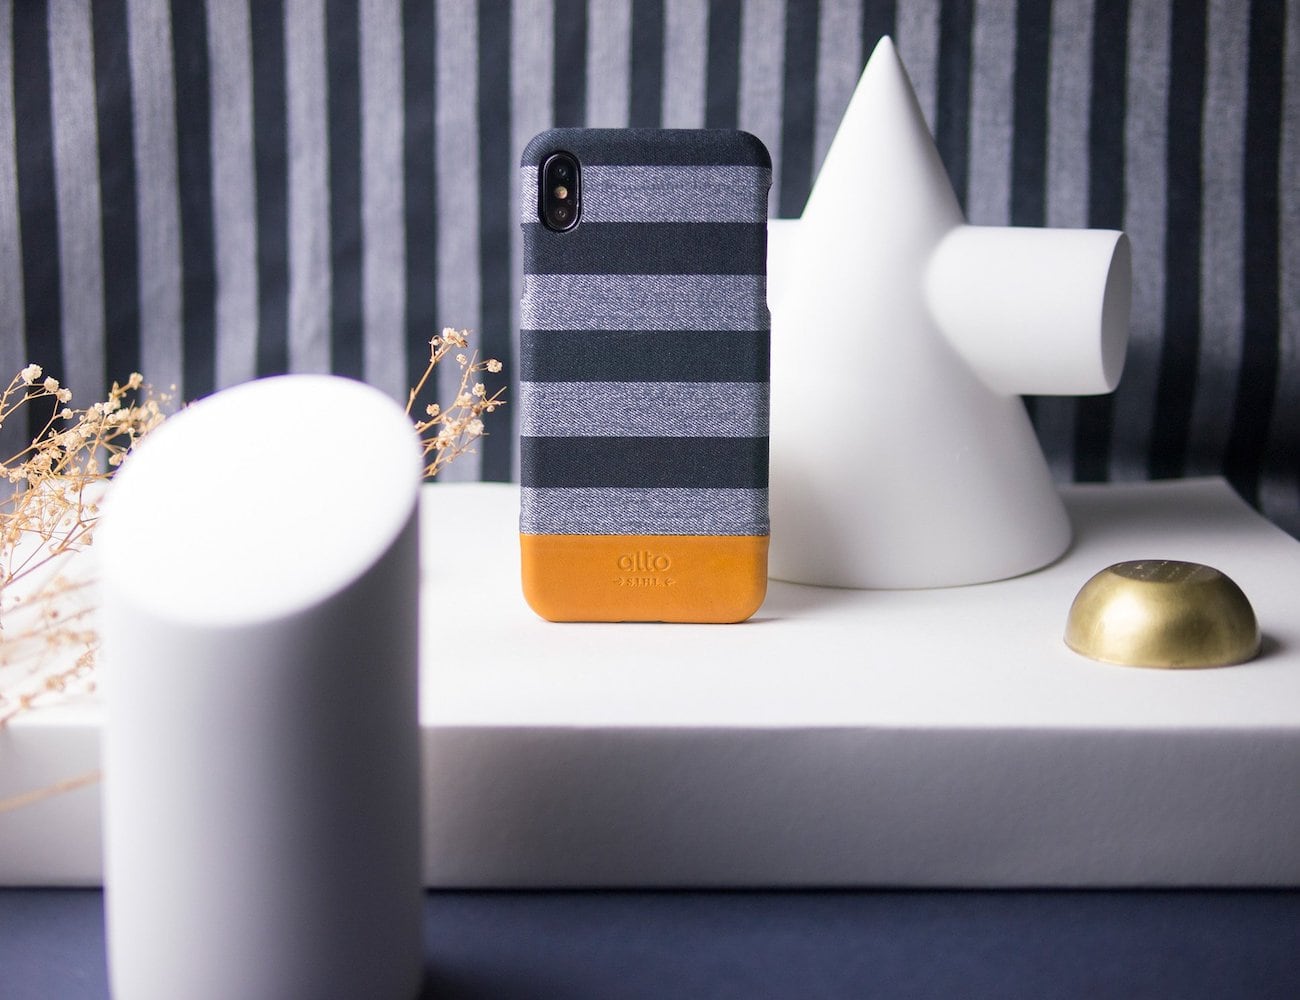 Alto Denim Leather Case iPhone XS Max Collection offers chic protection for your smartphone